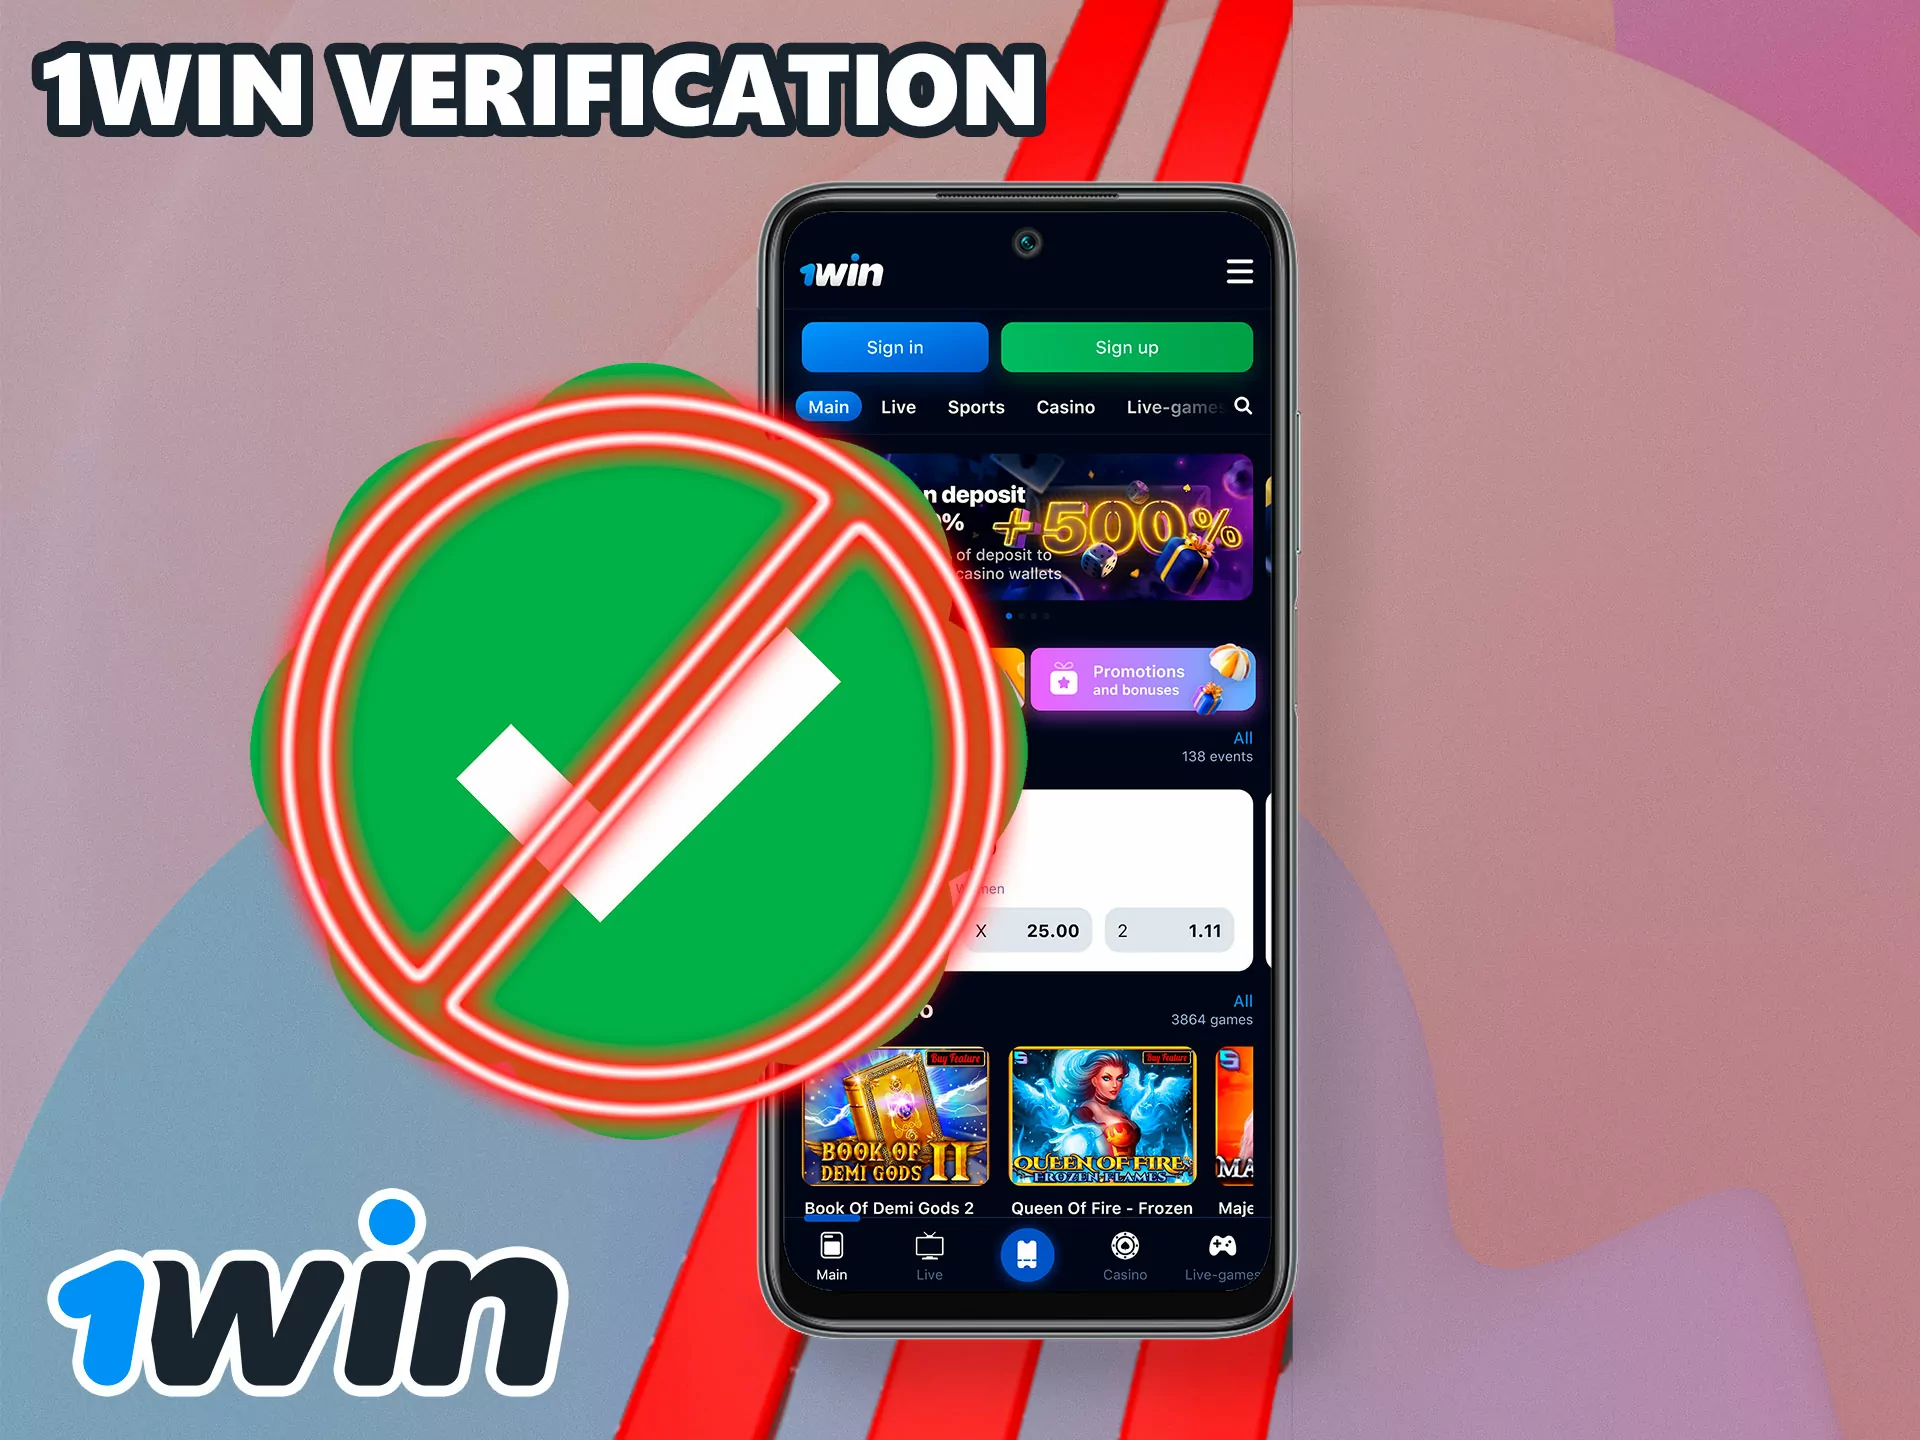 There is no verification procedure here, so you won't have to spend a lot of time on this process.